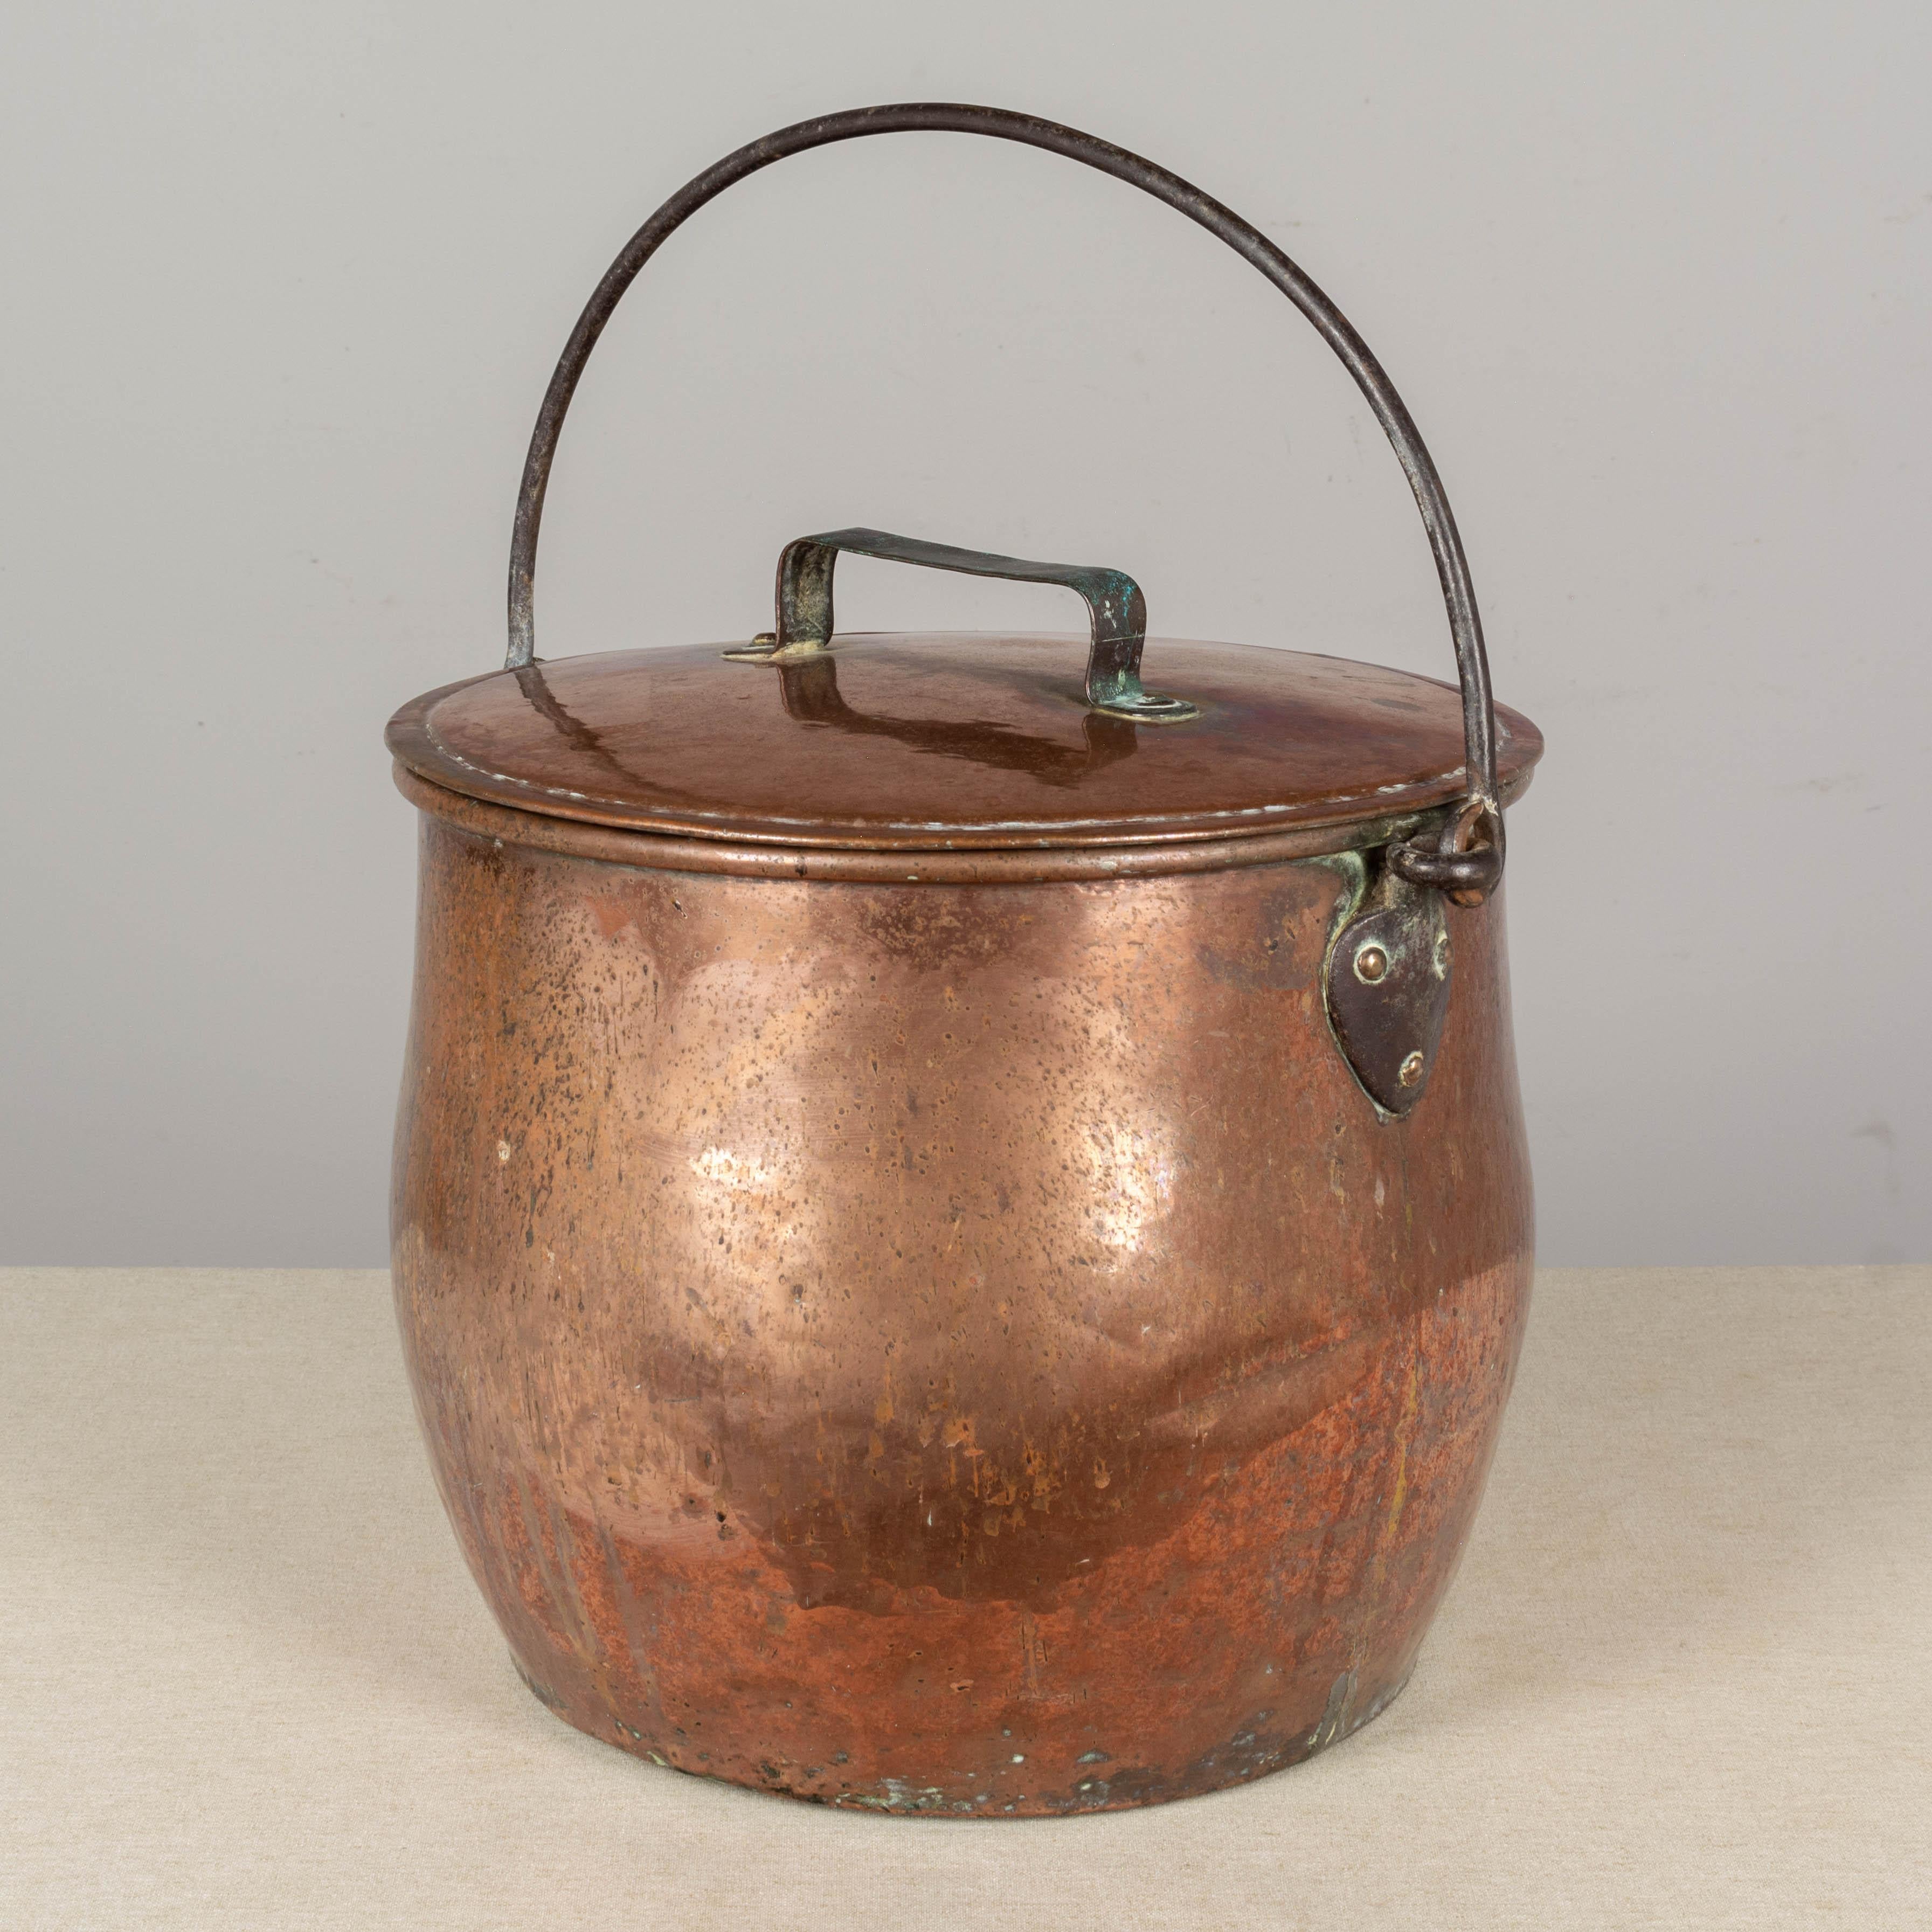 A large 19th century French hammered copper stock pot with tight fitting riveted handled lid. Hand-wrought iron loop to hang the pot over a fire. Beautiful warm patina with streaks and green oxidation. Rustic condition with dents and light